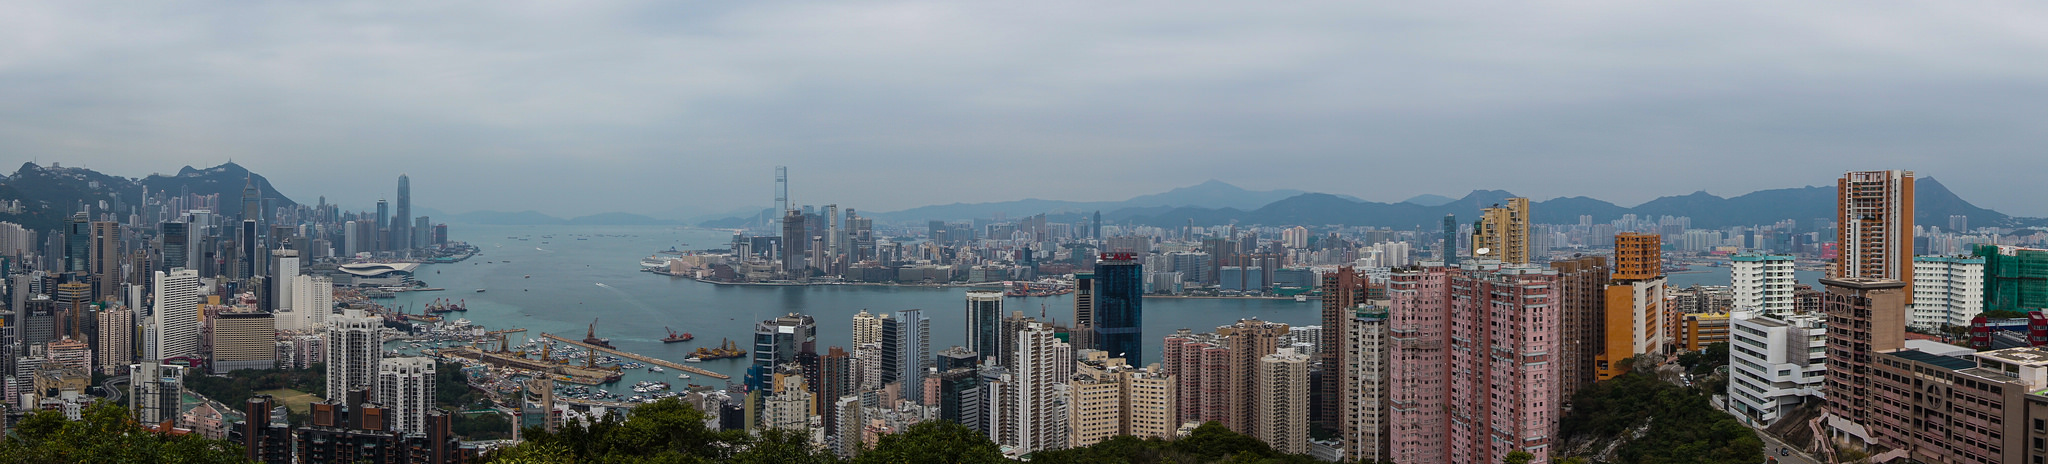 A panoramic view over Hong Kong's buildings and bay